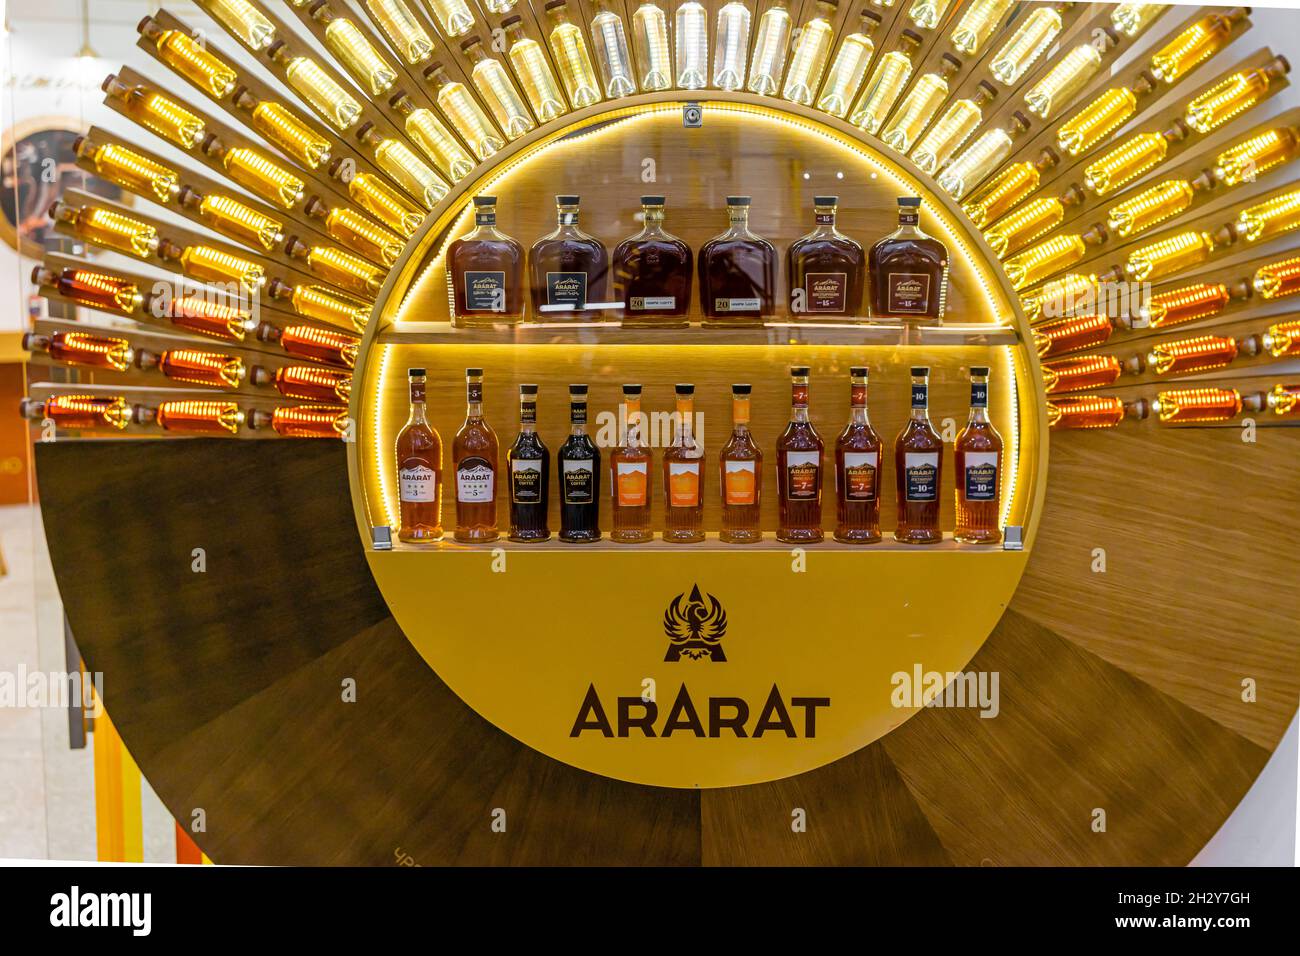 Ararat brandy bottles display in Armenia pavillion in VDNKH, Moscow, Russia. Cognac-style premium brandy that has been produced since 1887. Stock Photo